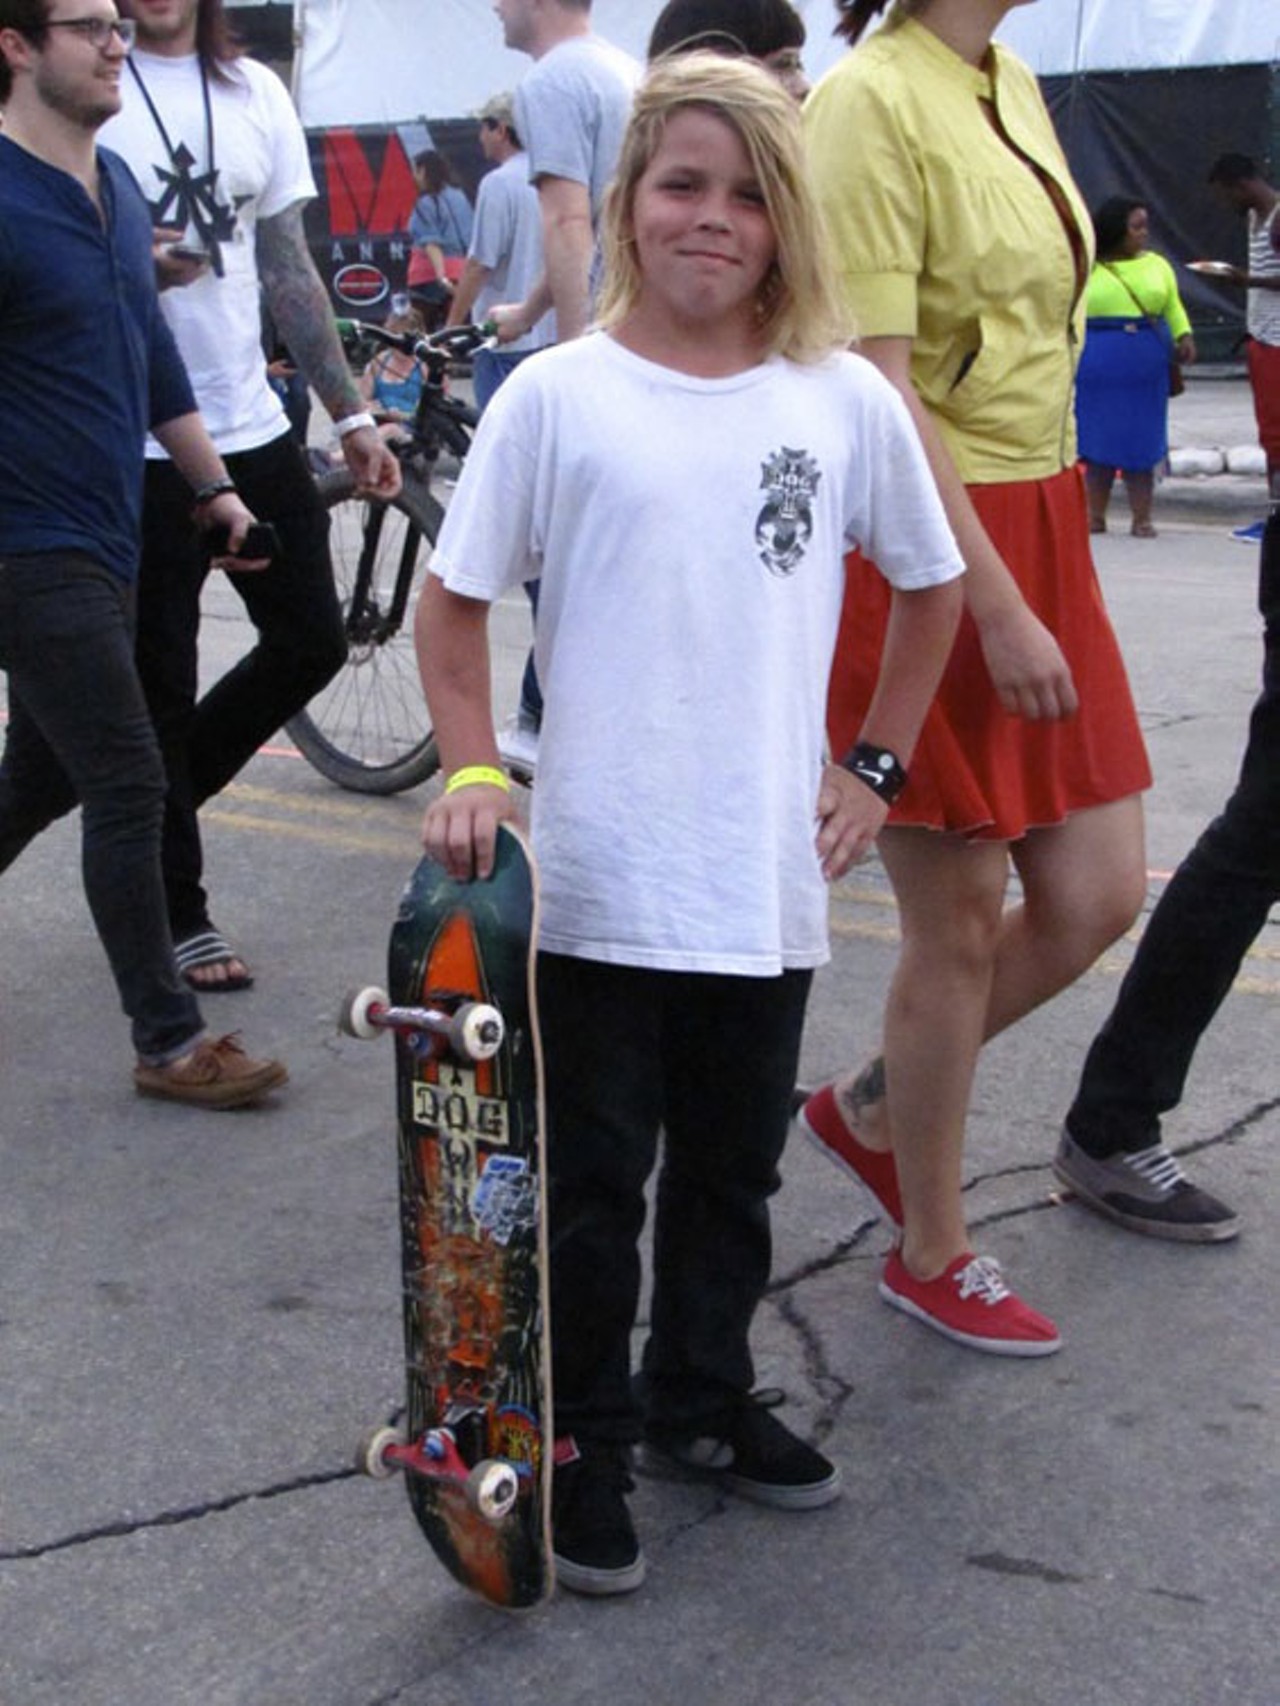 A young skateboarder at SXSW